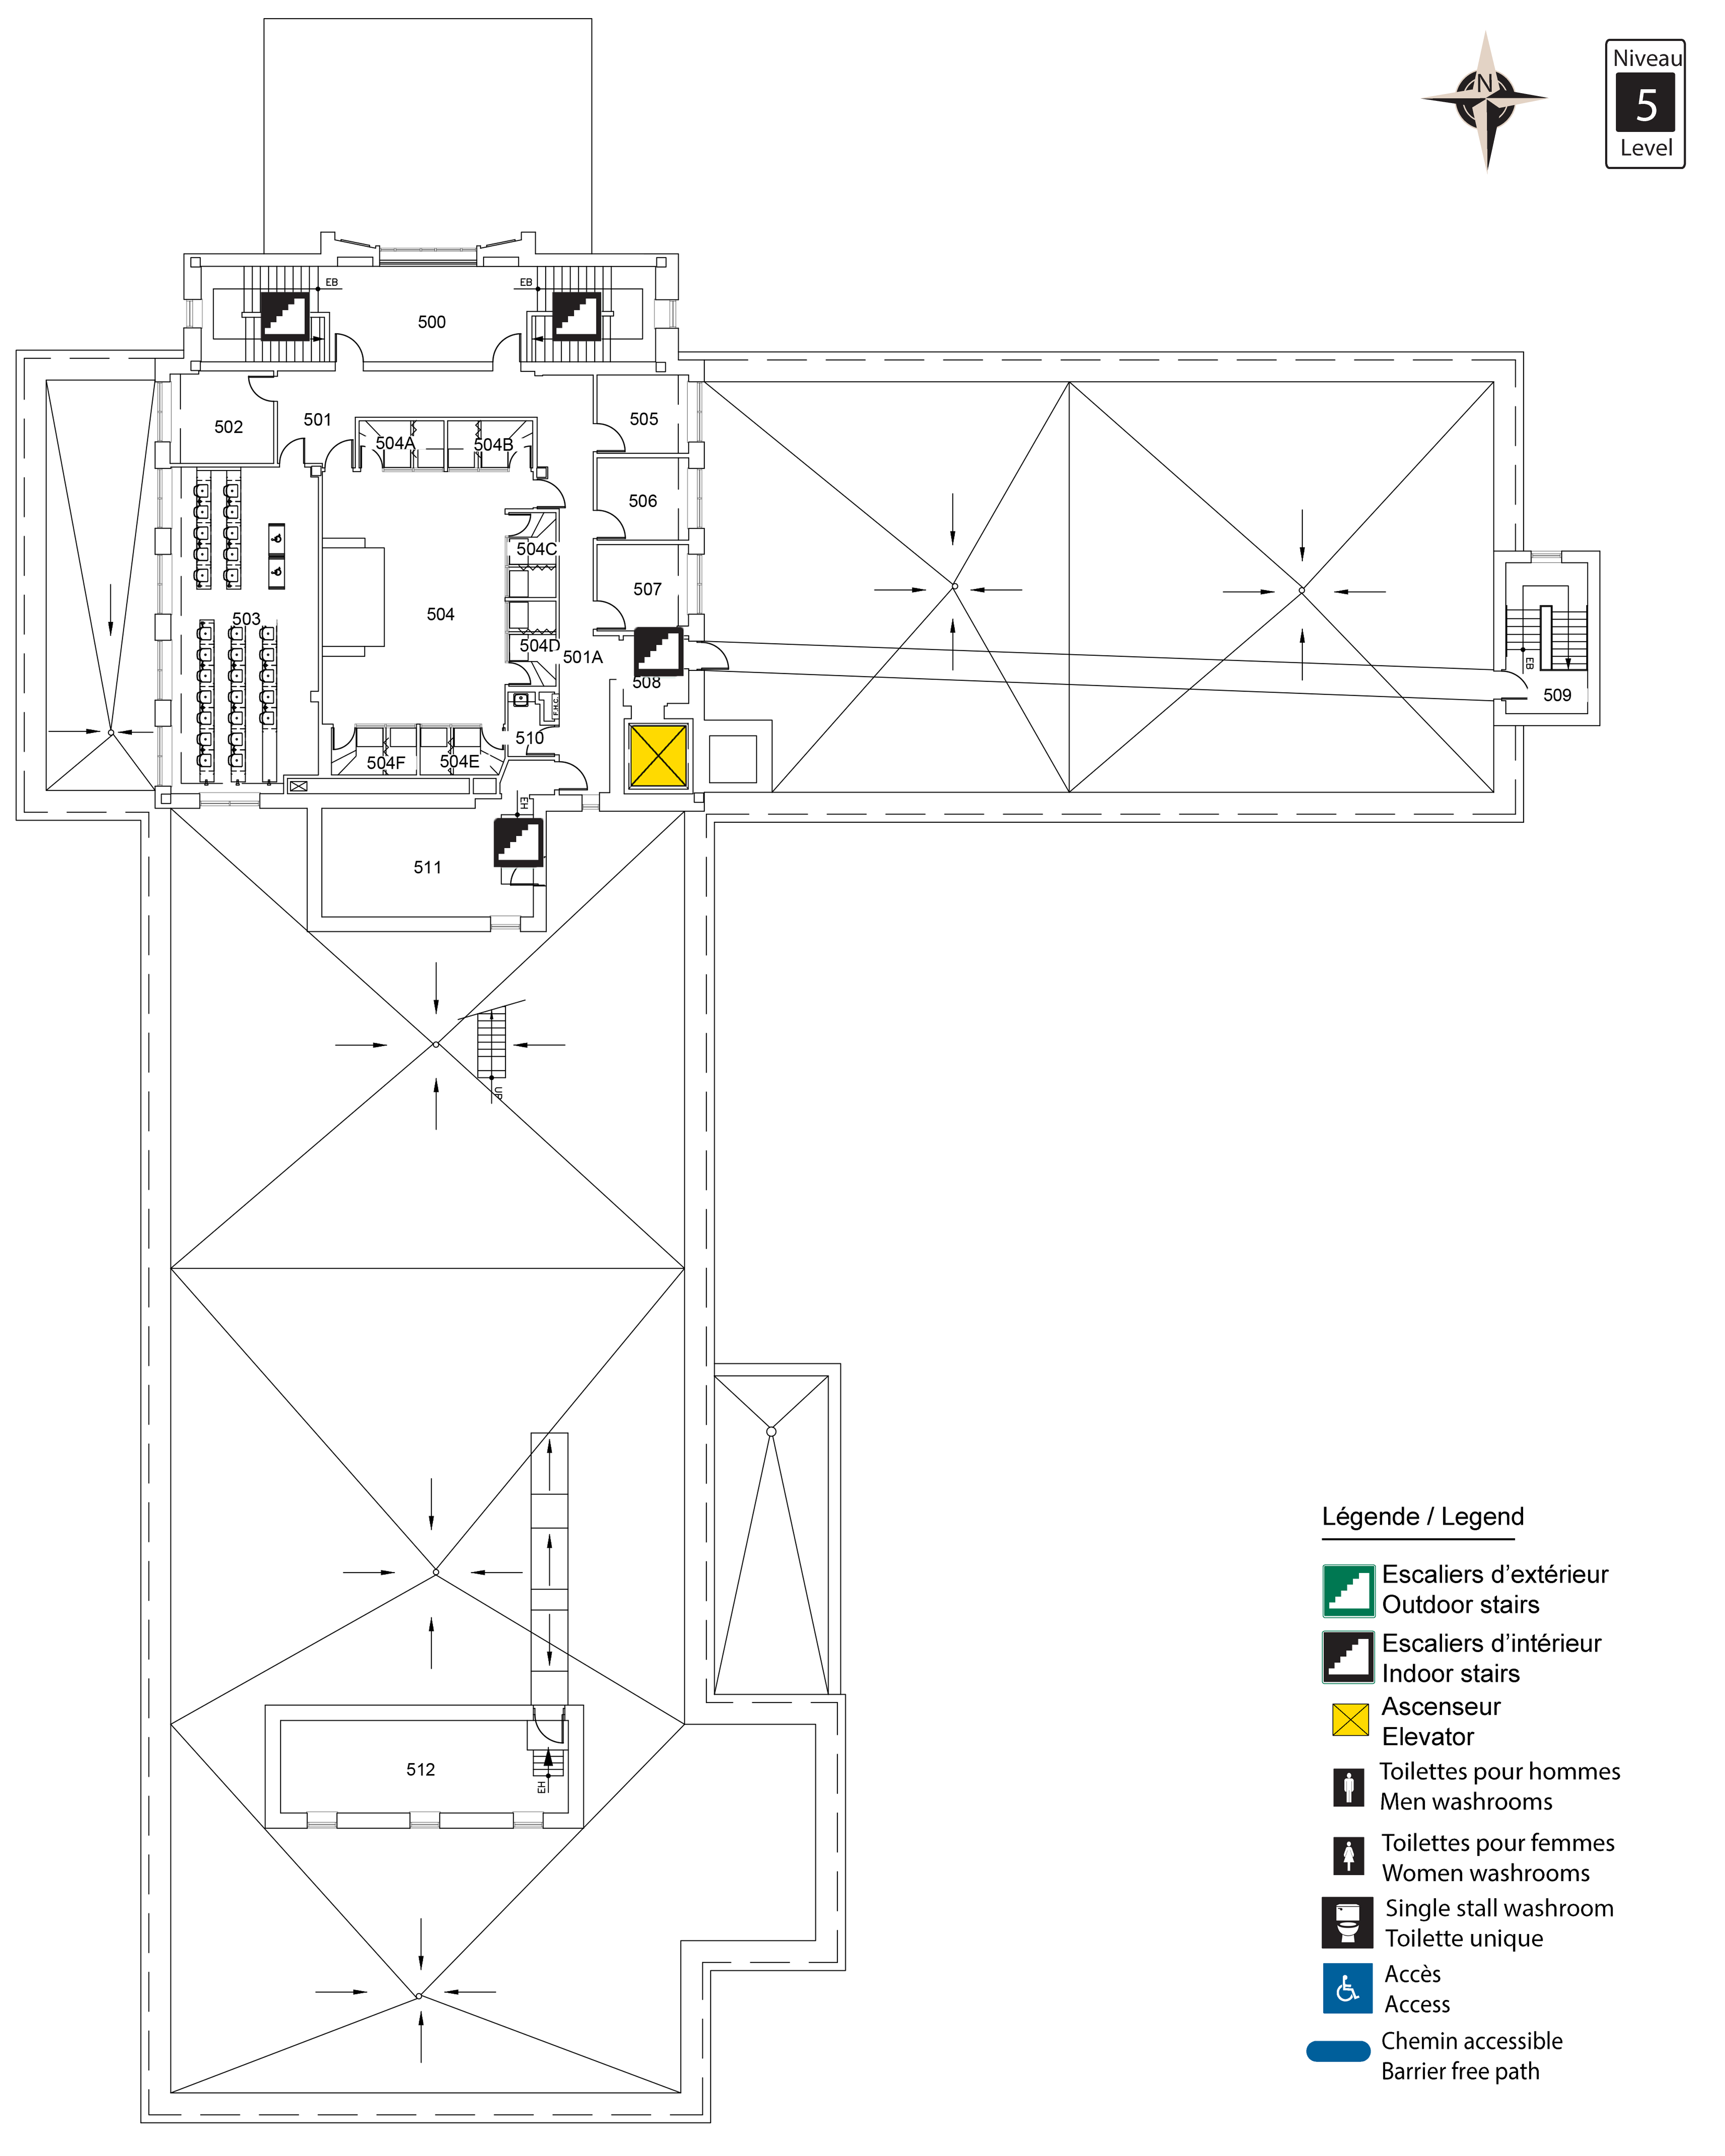 Accessible map of SMD level 5